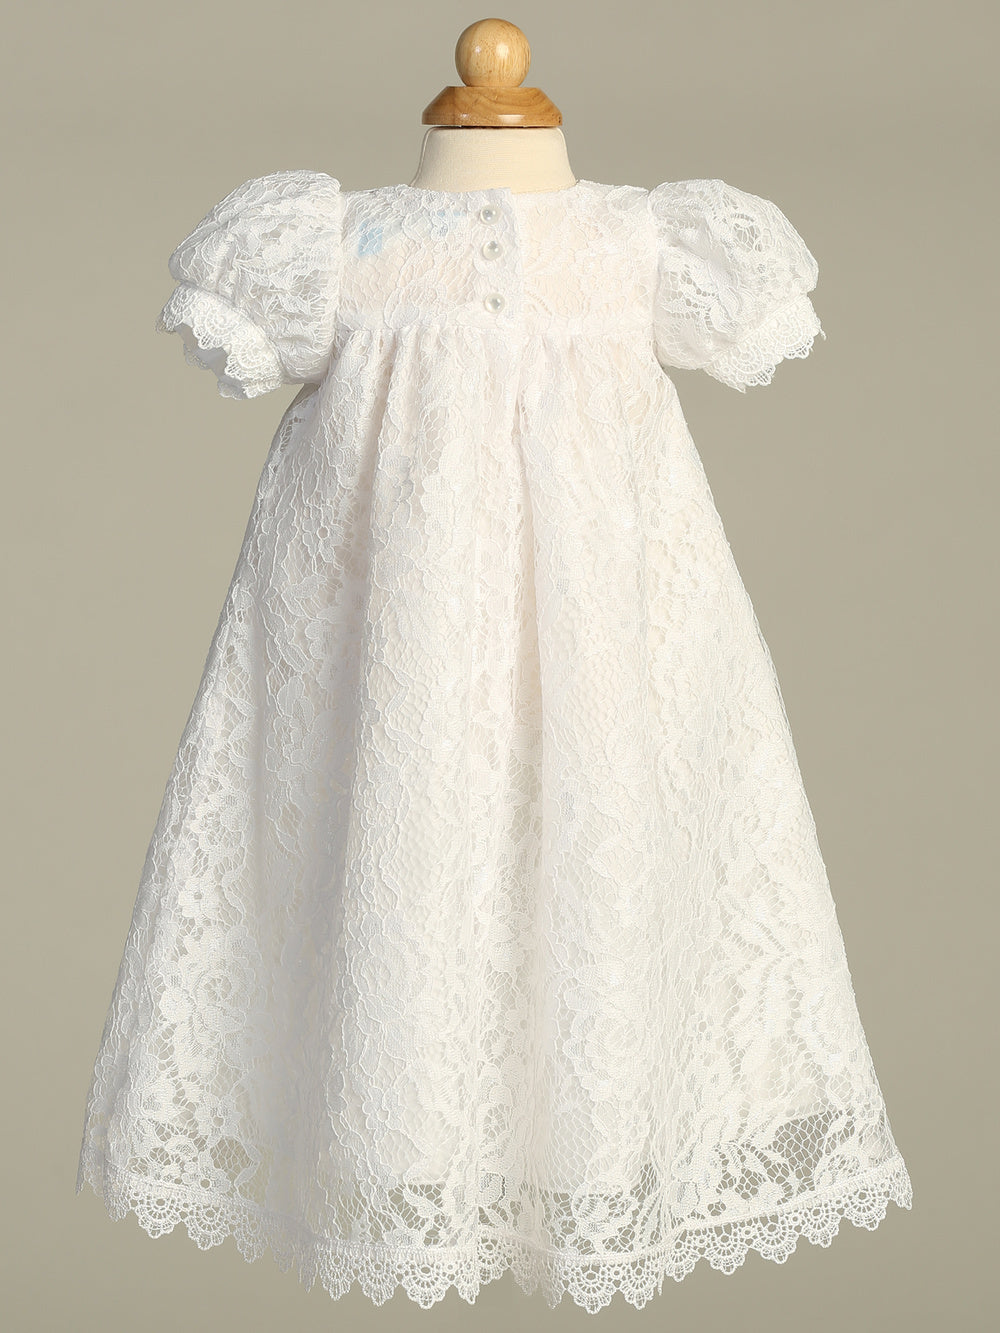 All Over Lace Long Girls Baptism Gown - Grandma's Little Darlings sells baptism and christening outfits 